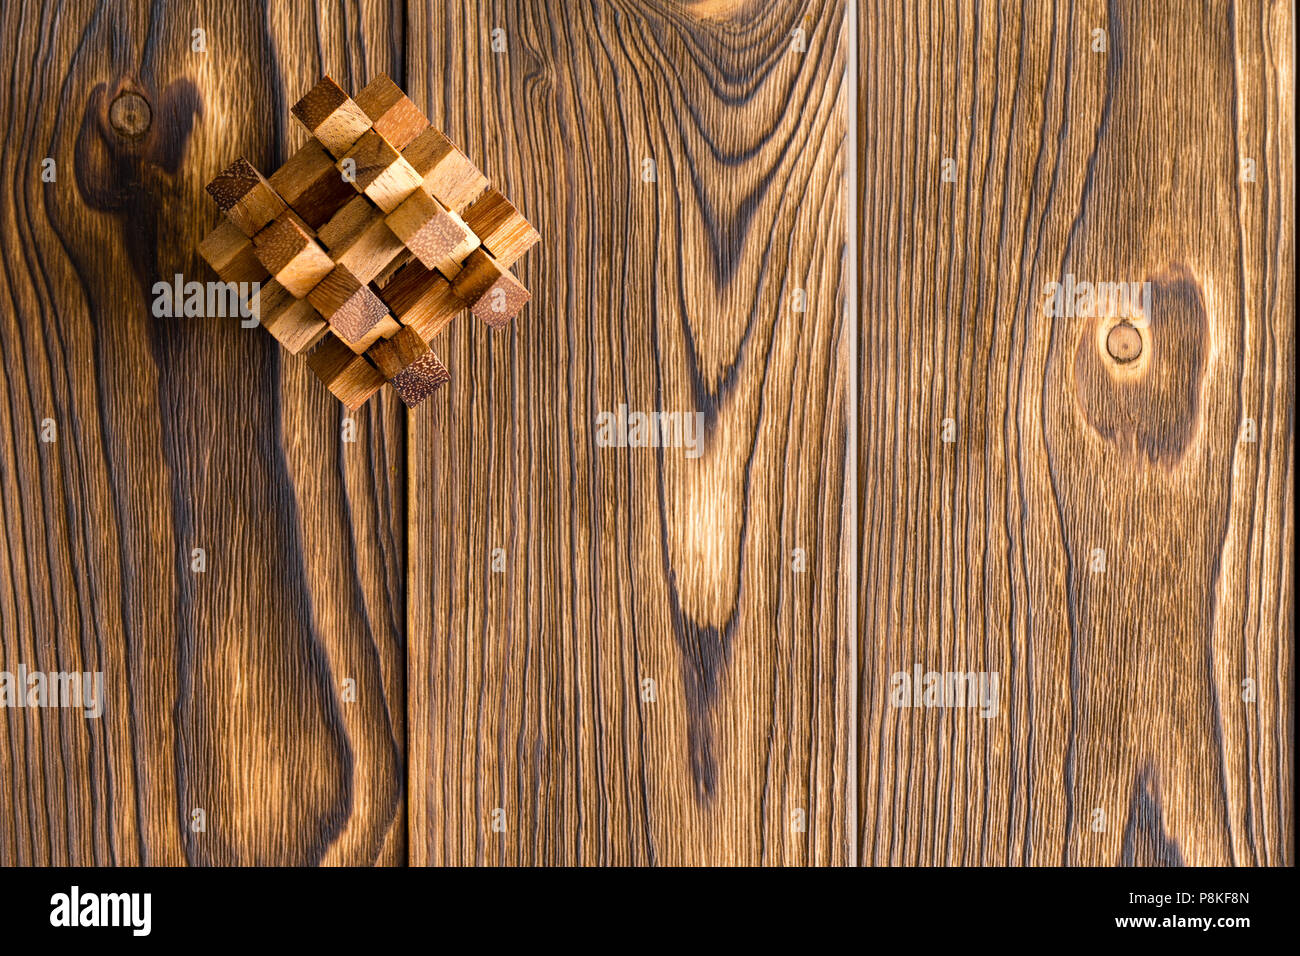 Intricate interlocked wooden puzzle in the corner on a textured wood background with woodgrain and copy space Stock Photo